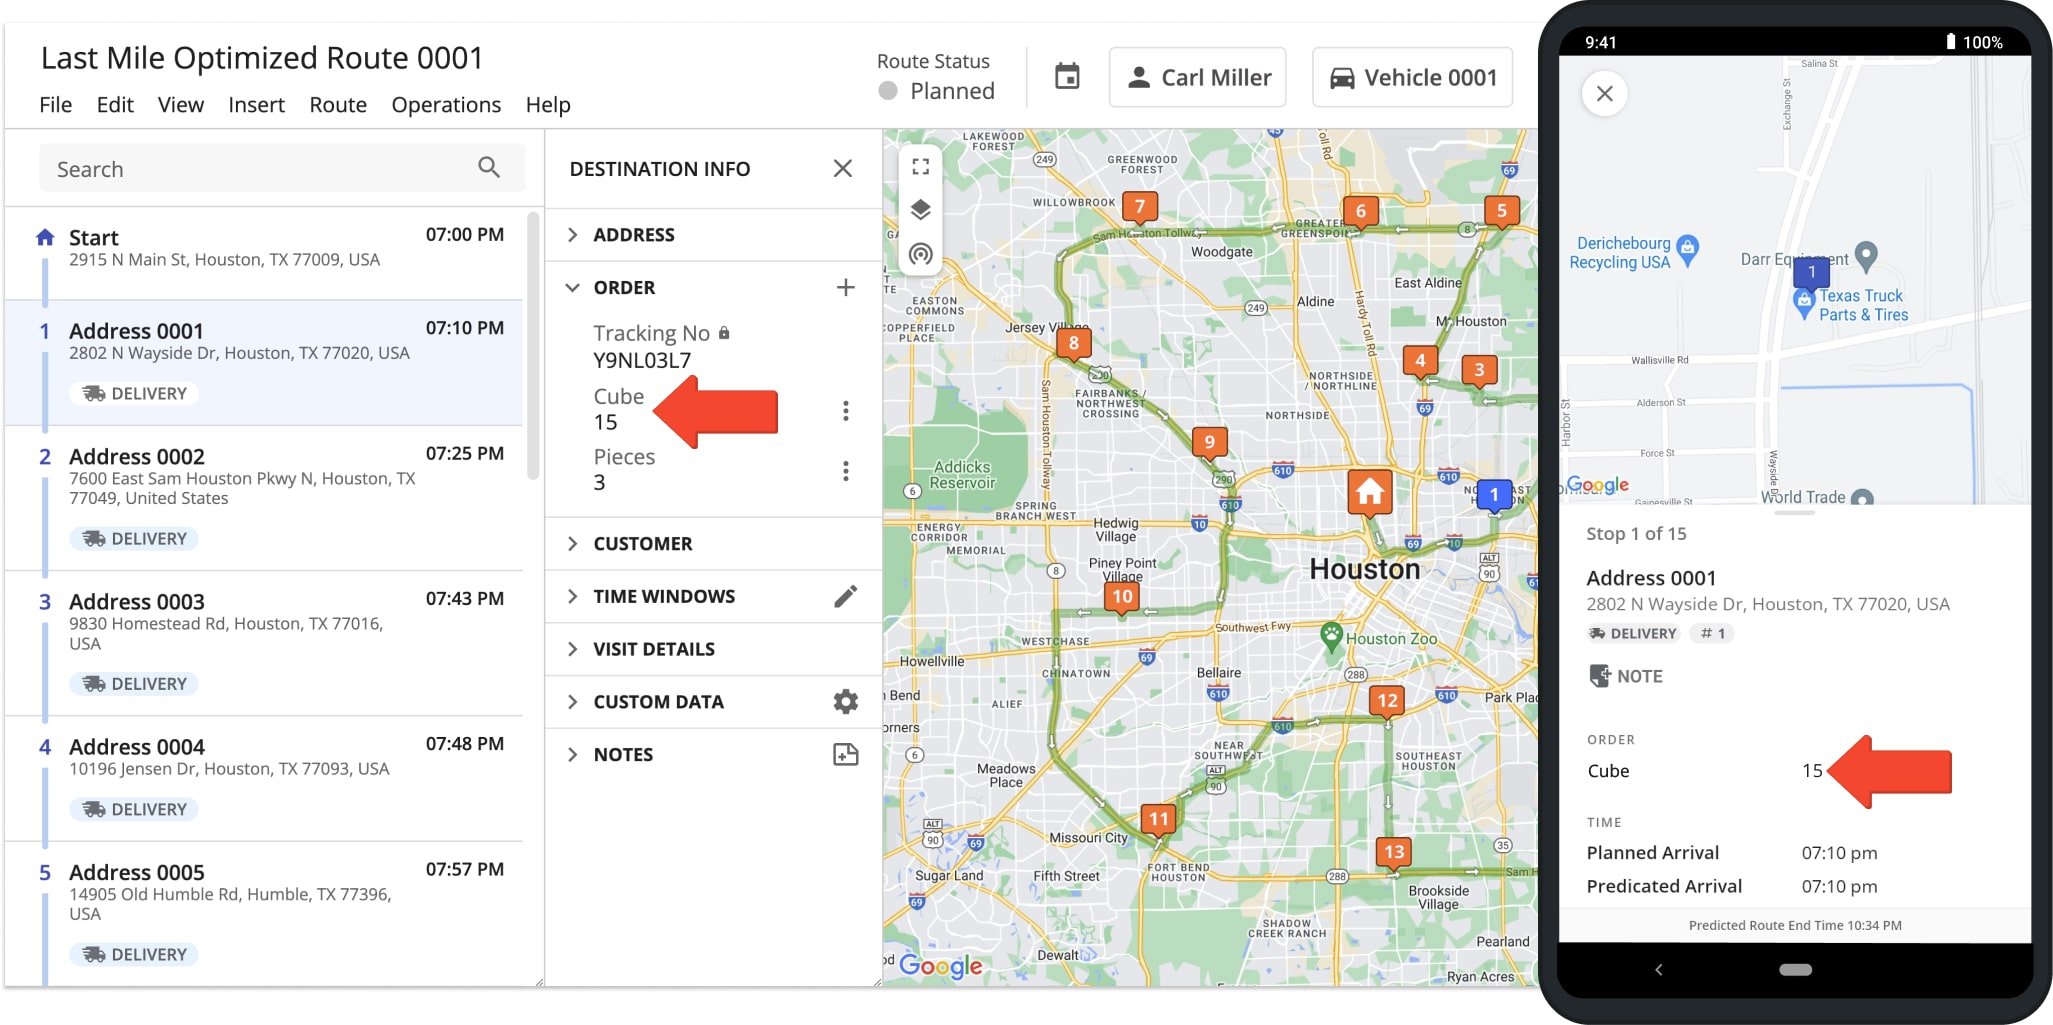 Changes made to routes or route destinations, such as modifying the Cube Business Rule for an address are automatically synched to the connected devices of all respective users associated with the route or main Route4Me account.